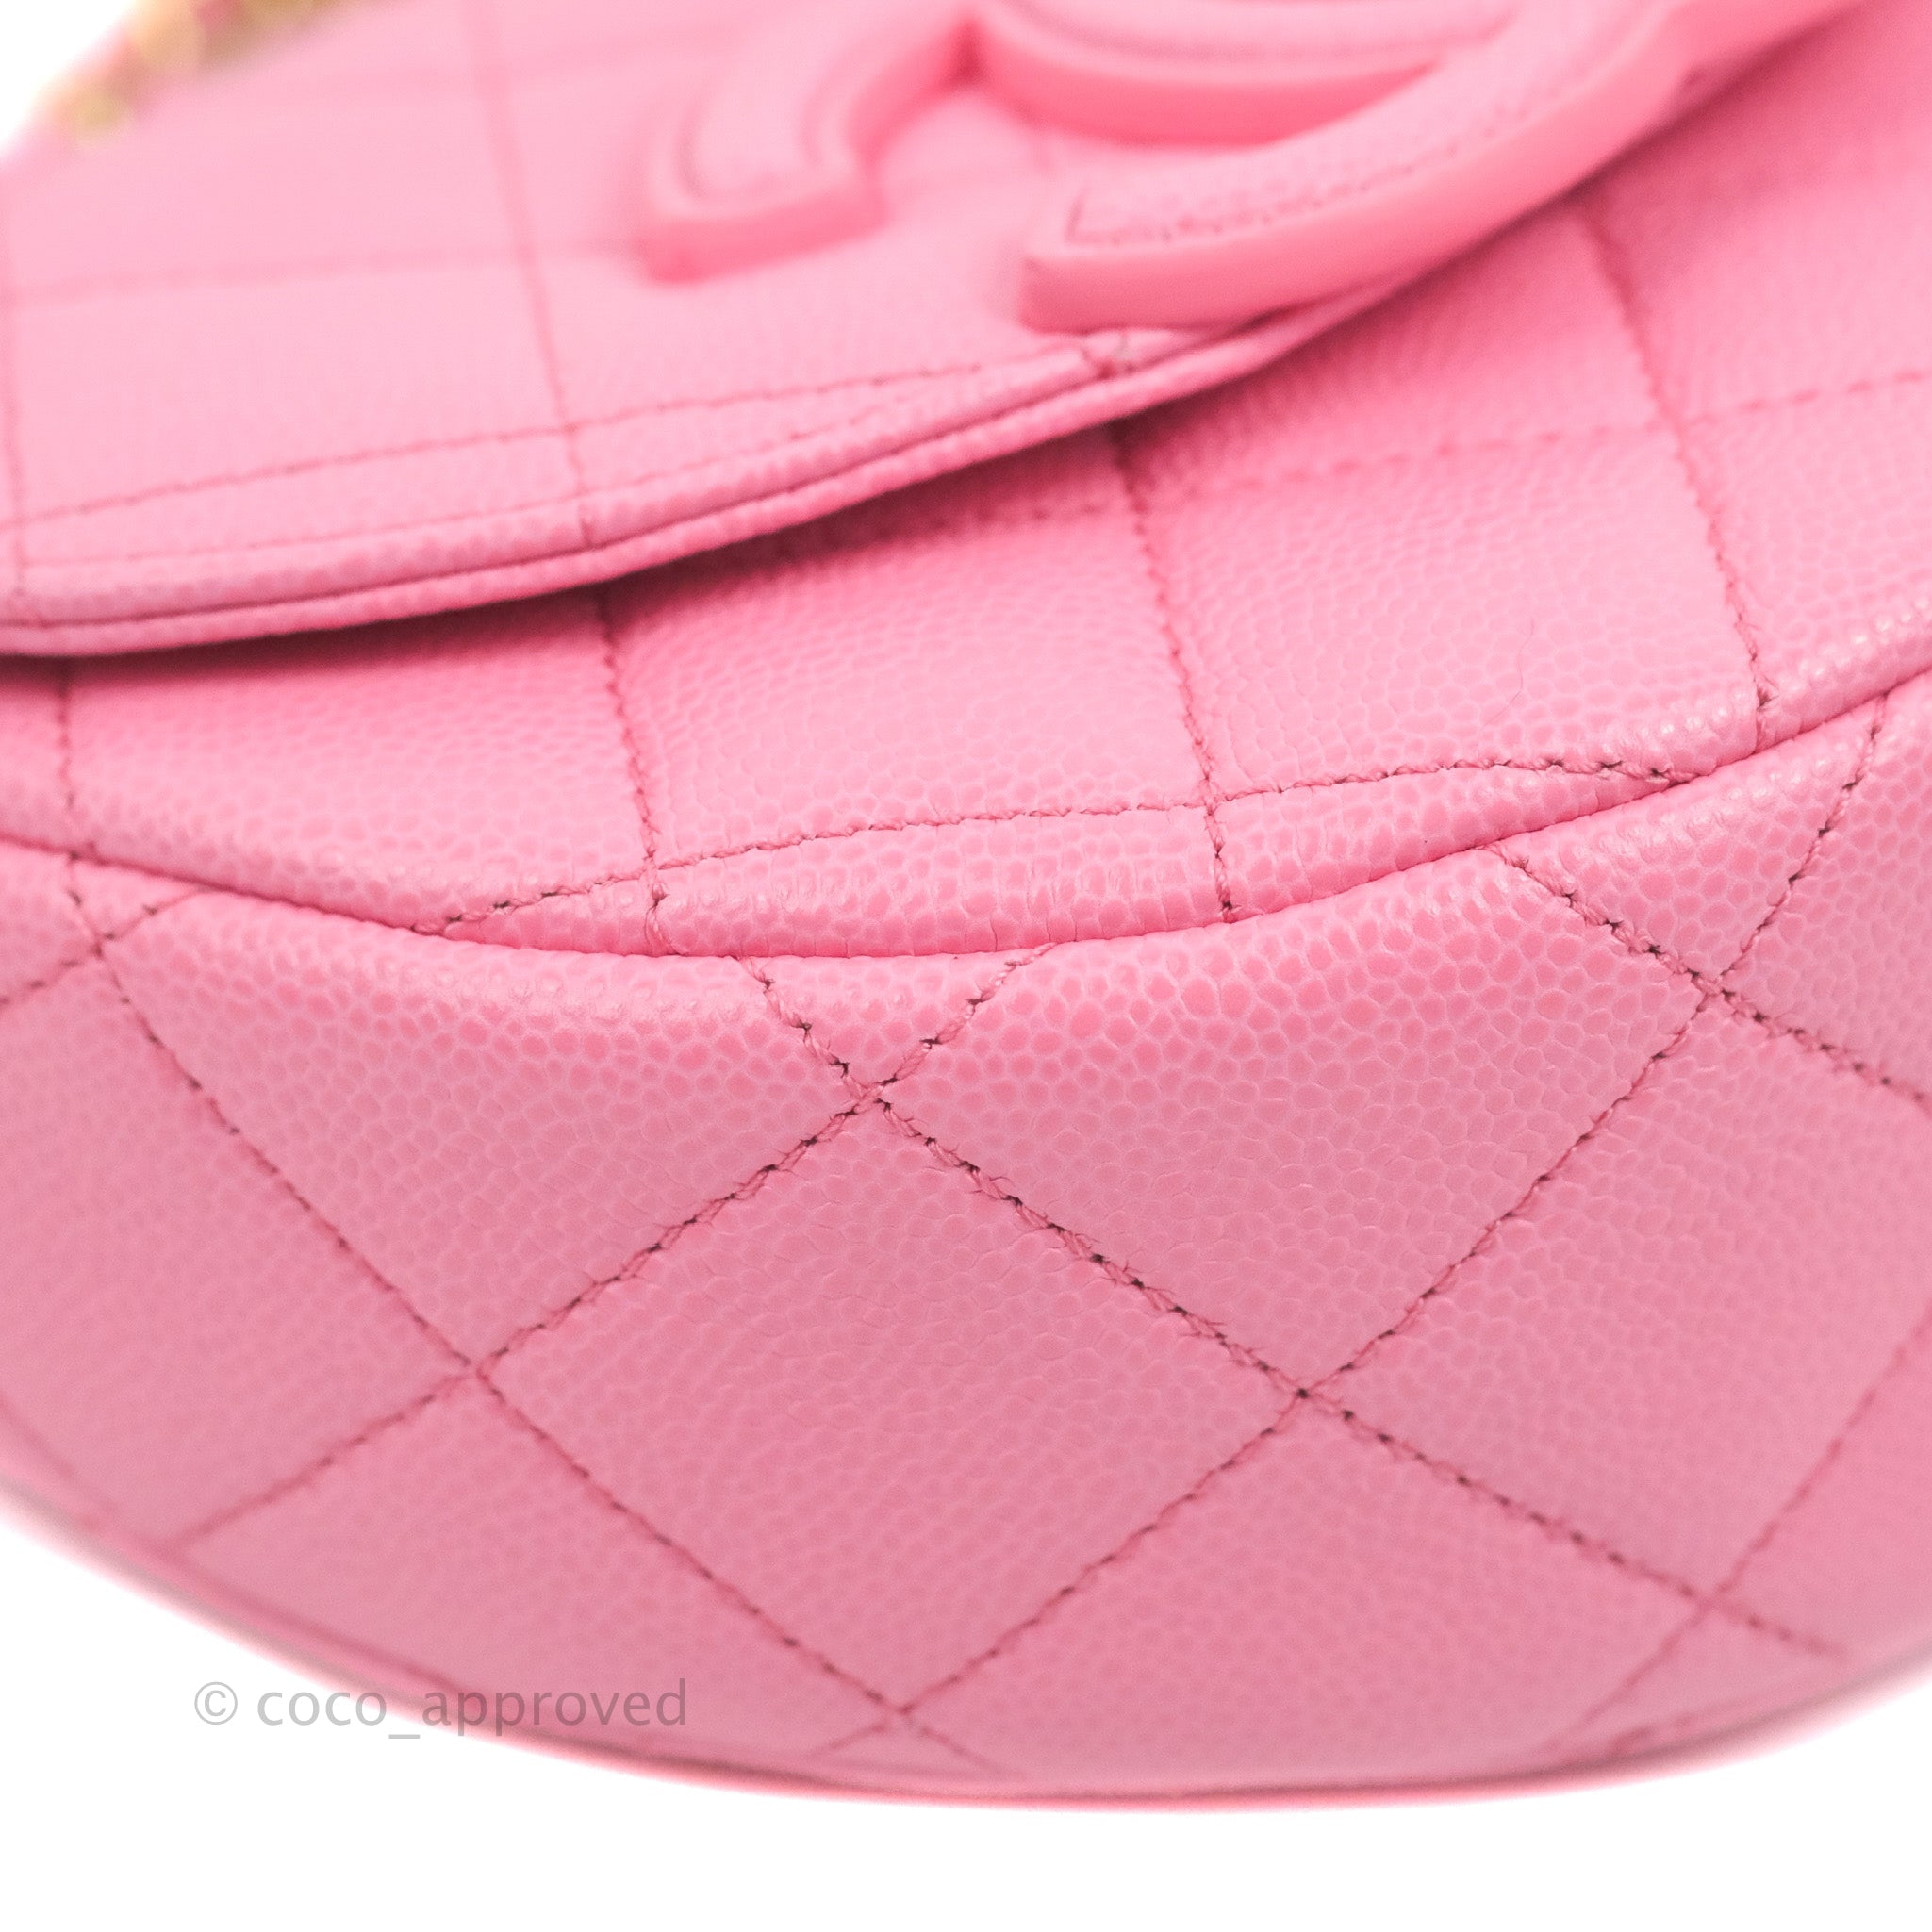 SOLD) CHANEL Pink Caviar Mini Clutch With